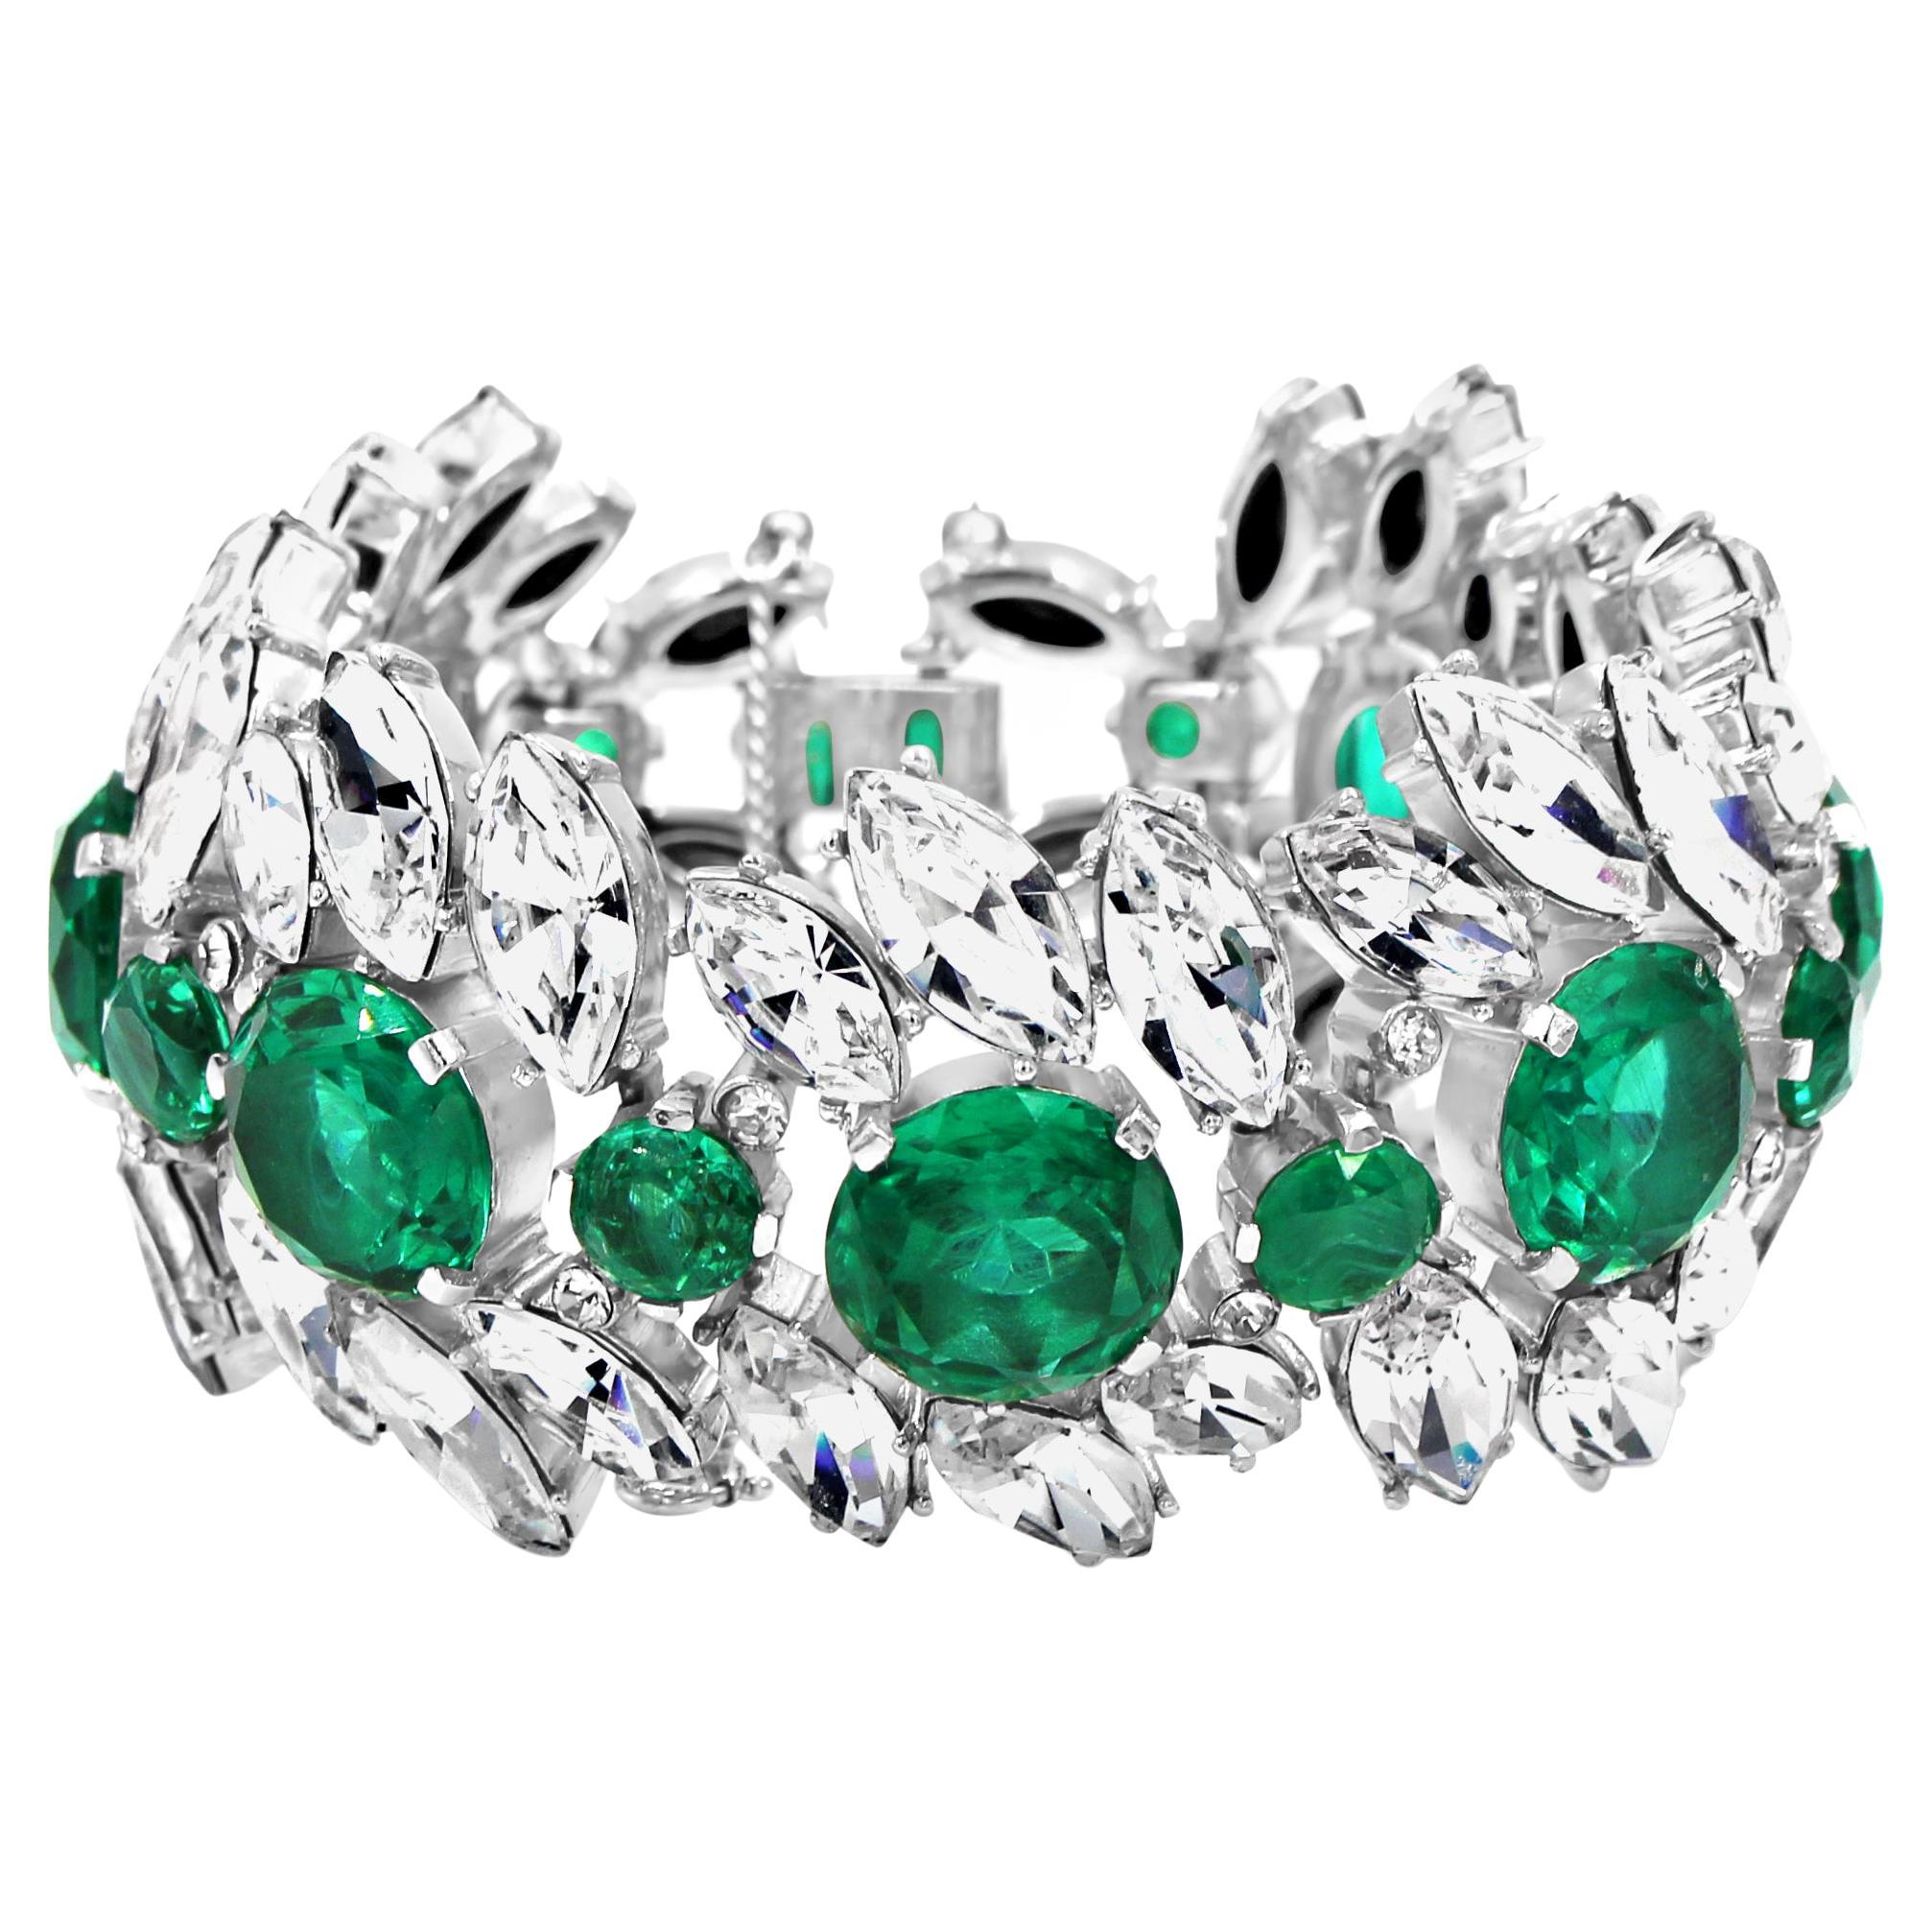 Vintage Trifari Emerald Green and Rhinestone Bracelet. The dates of this bracelet make it between 1955-1969. This looks like a very expensive Art Deco Bracelet.  It is all prong set and wow does it deliver. In great shape.  You need nothing